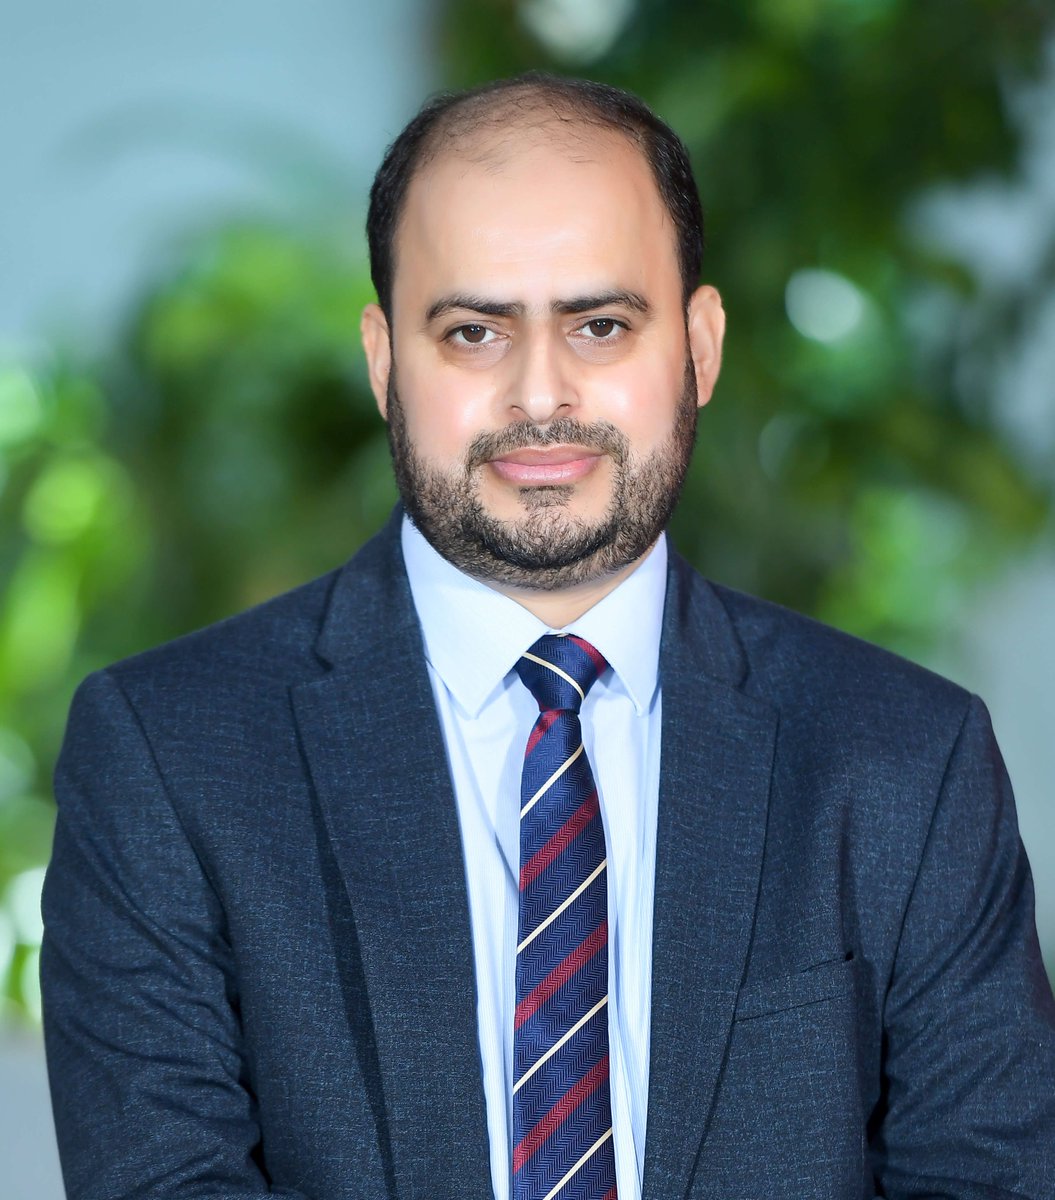 We welcome Dr. Ahsan Ul Haq Qurashi from @KhalifaUni as our new Editorial Board member. Dr Qurashi will be helping us to handle manuscripts in catalysis and nanotech for clean energy applications.